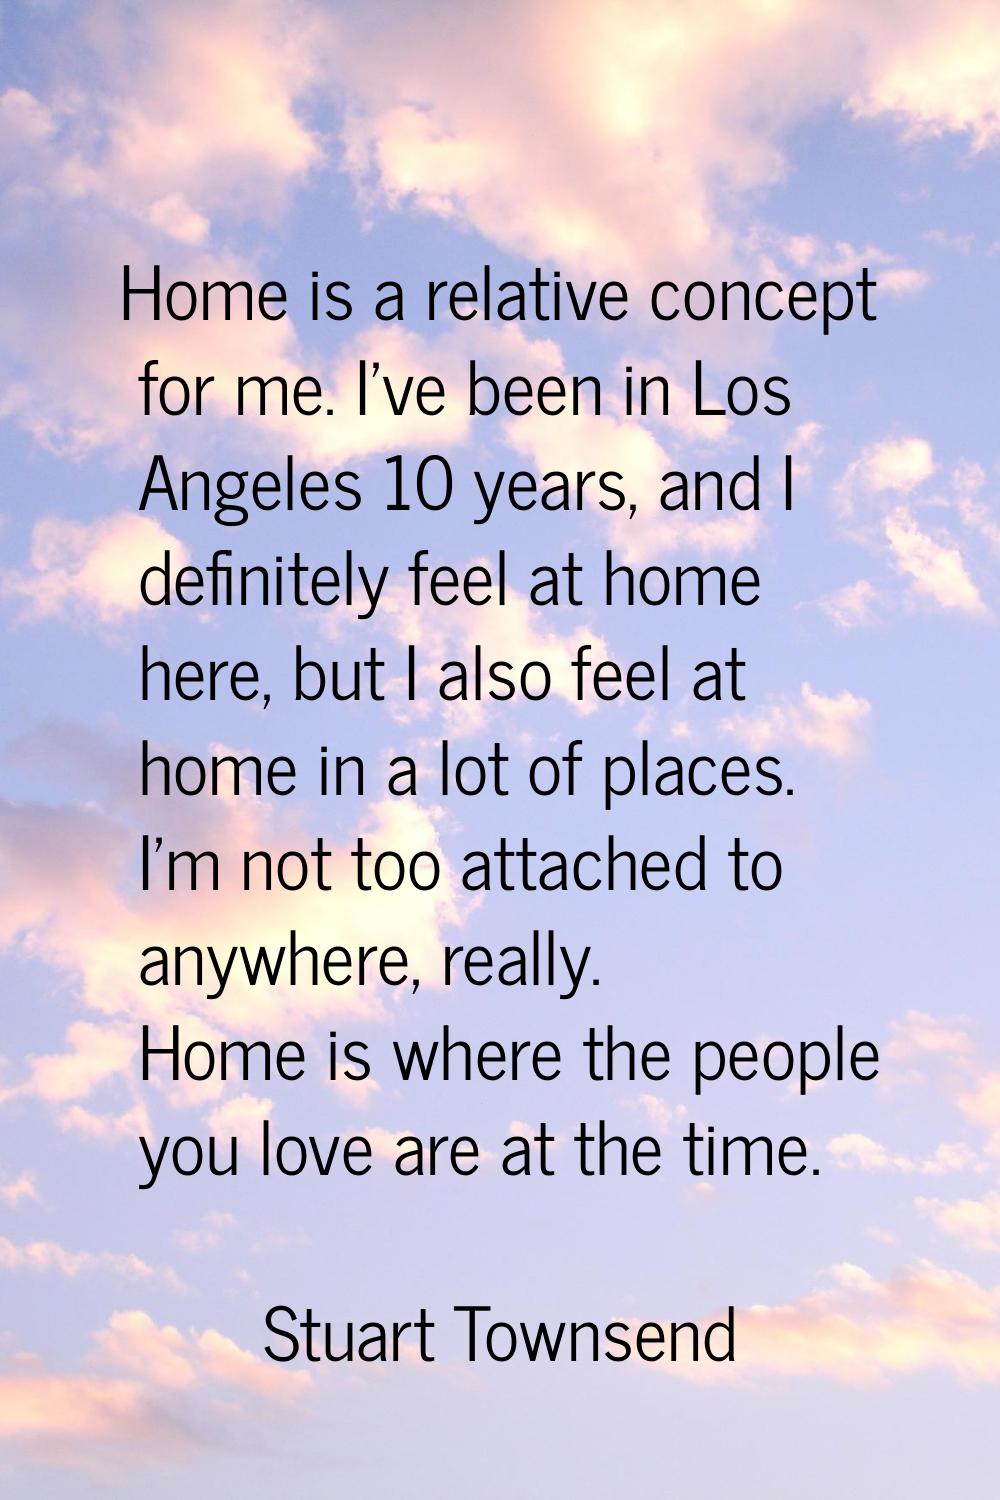 Home is a relative concept for me. I've been in Los Angeles 10 years, and I definitely feel at home